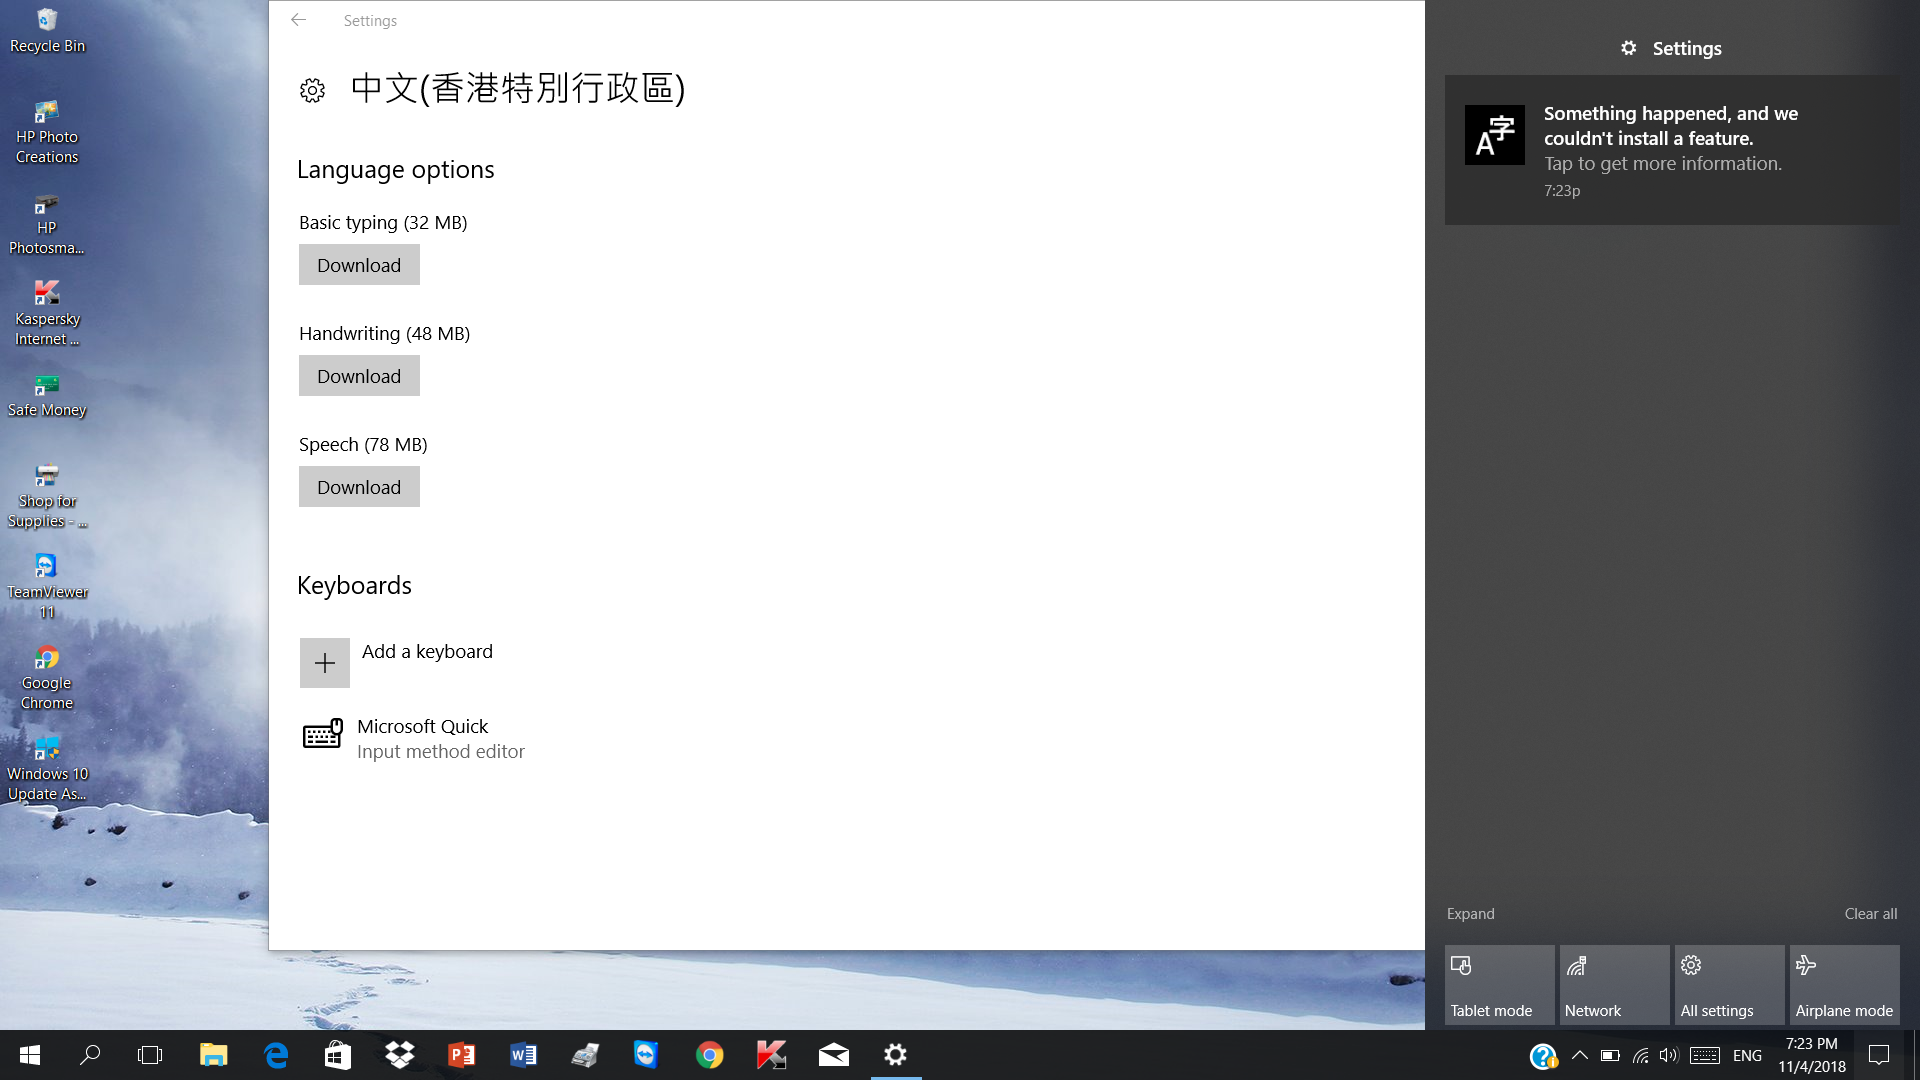 Windows 10  Install Chinese Handwriting Input in Windows 10 Oct 2020 Update Full Demo f57ee360-b8dc-4e7b-9657-9e3d846c426c?upload=true.png